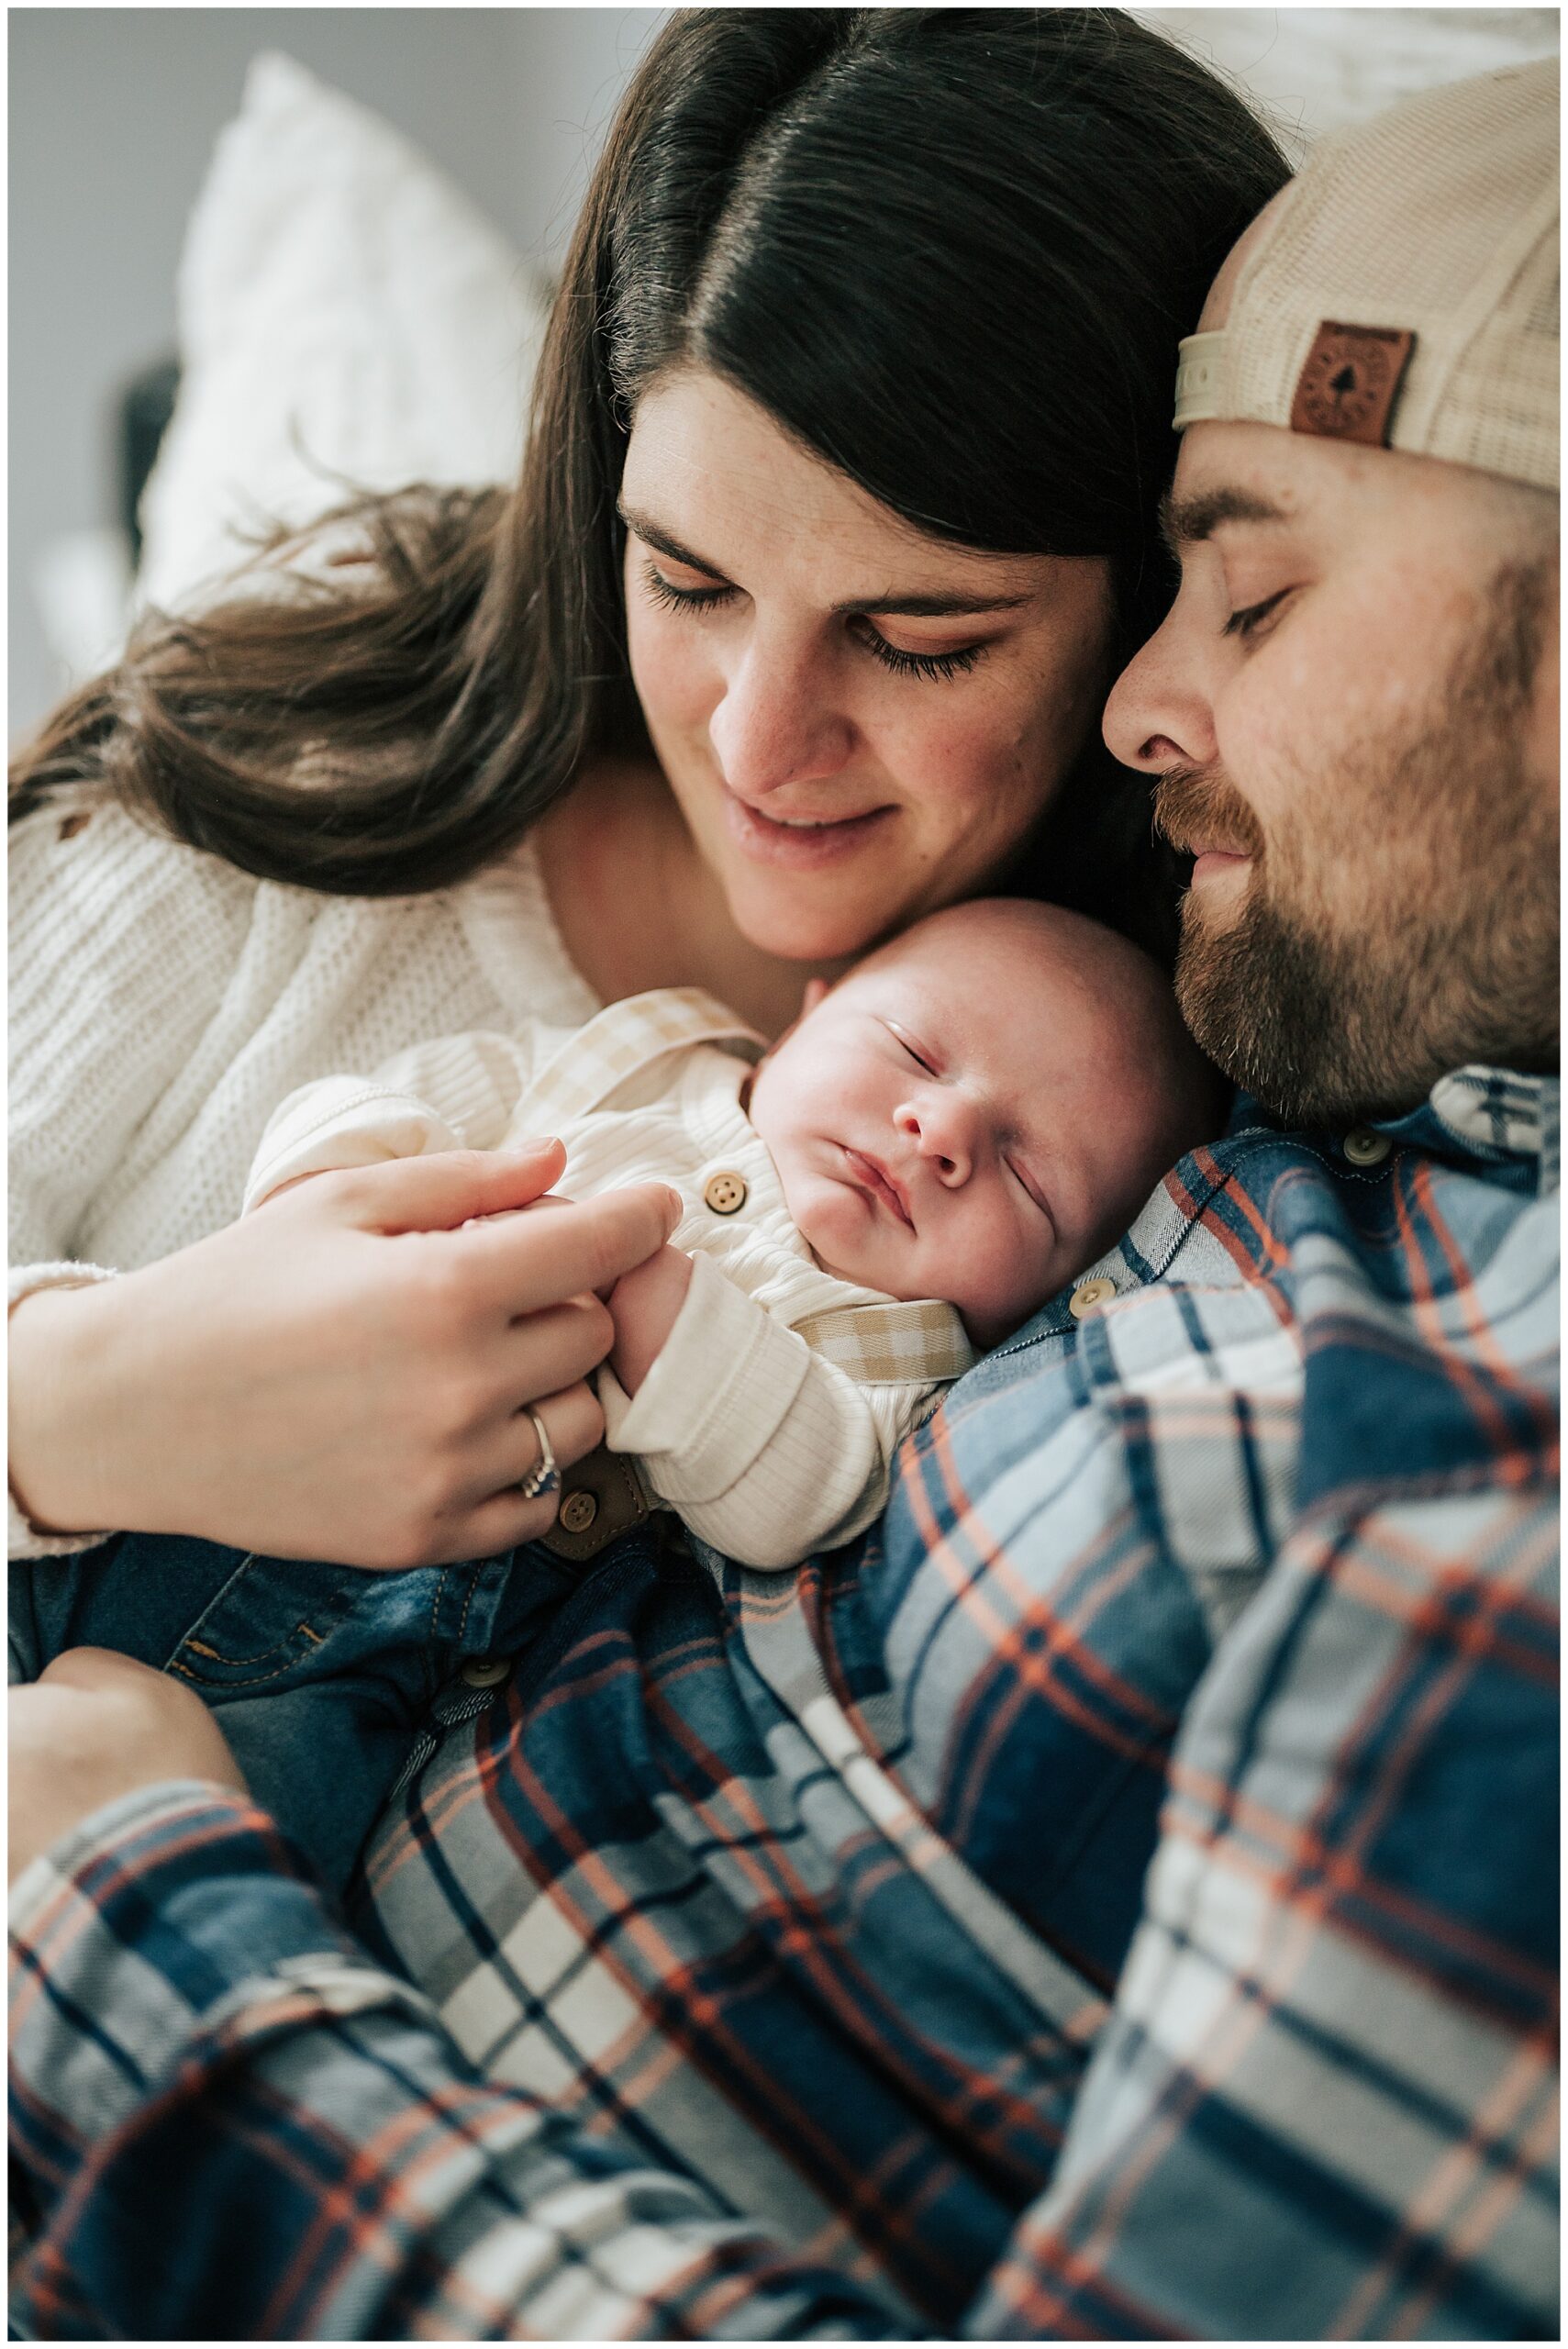 A professional photo showing how it felt at the very beginning as new parents treasure those newborn moments. A young mother and father are holding their newborn little baby boy and smiling.